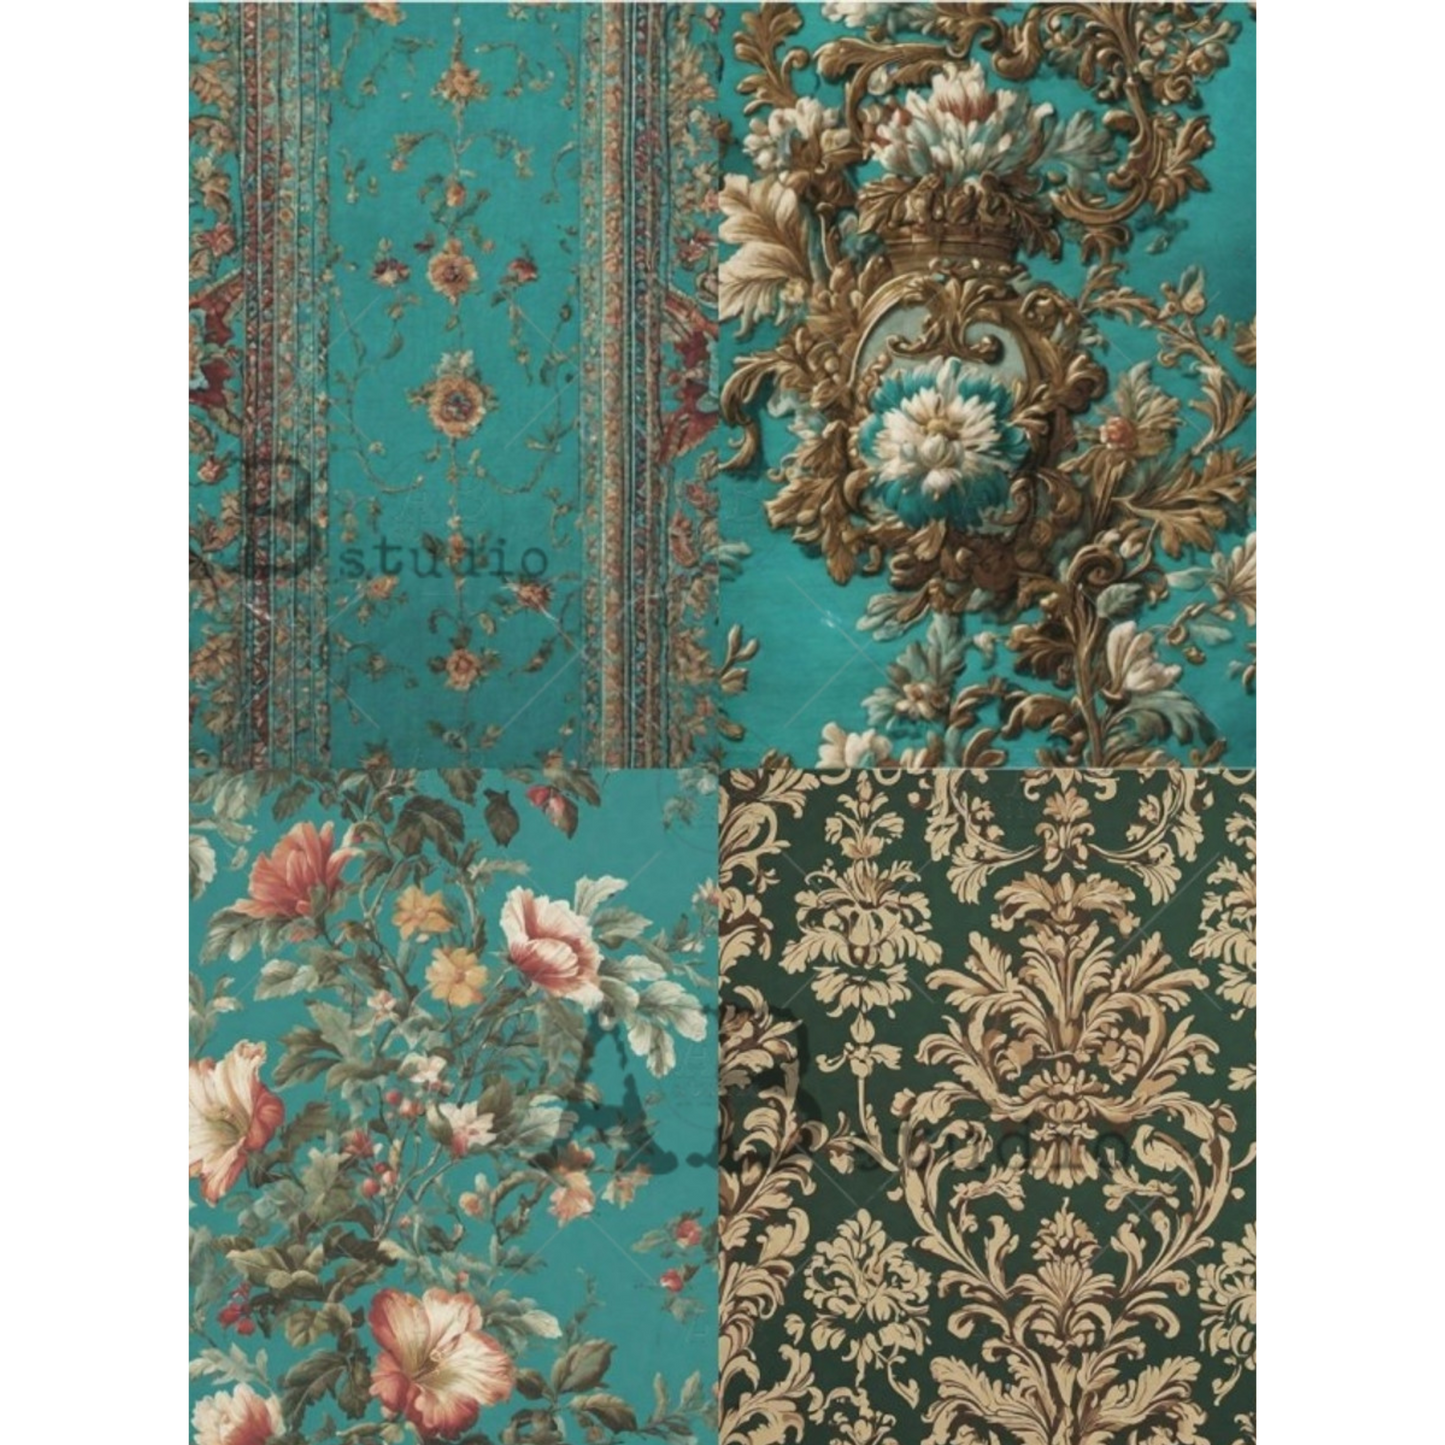 "Turquoise Tapestry 4 Pack" decoupage rice paper by AB Studio. Available at Milton's Daughter.